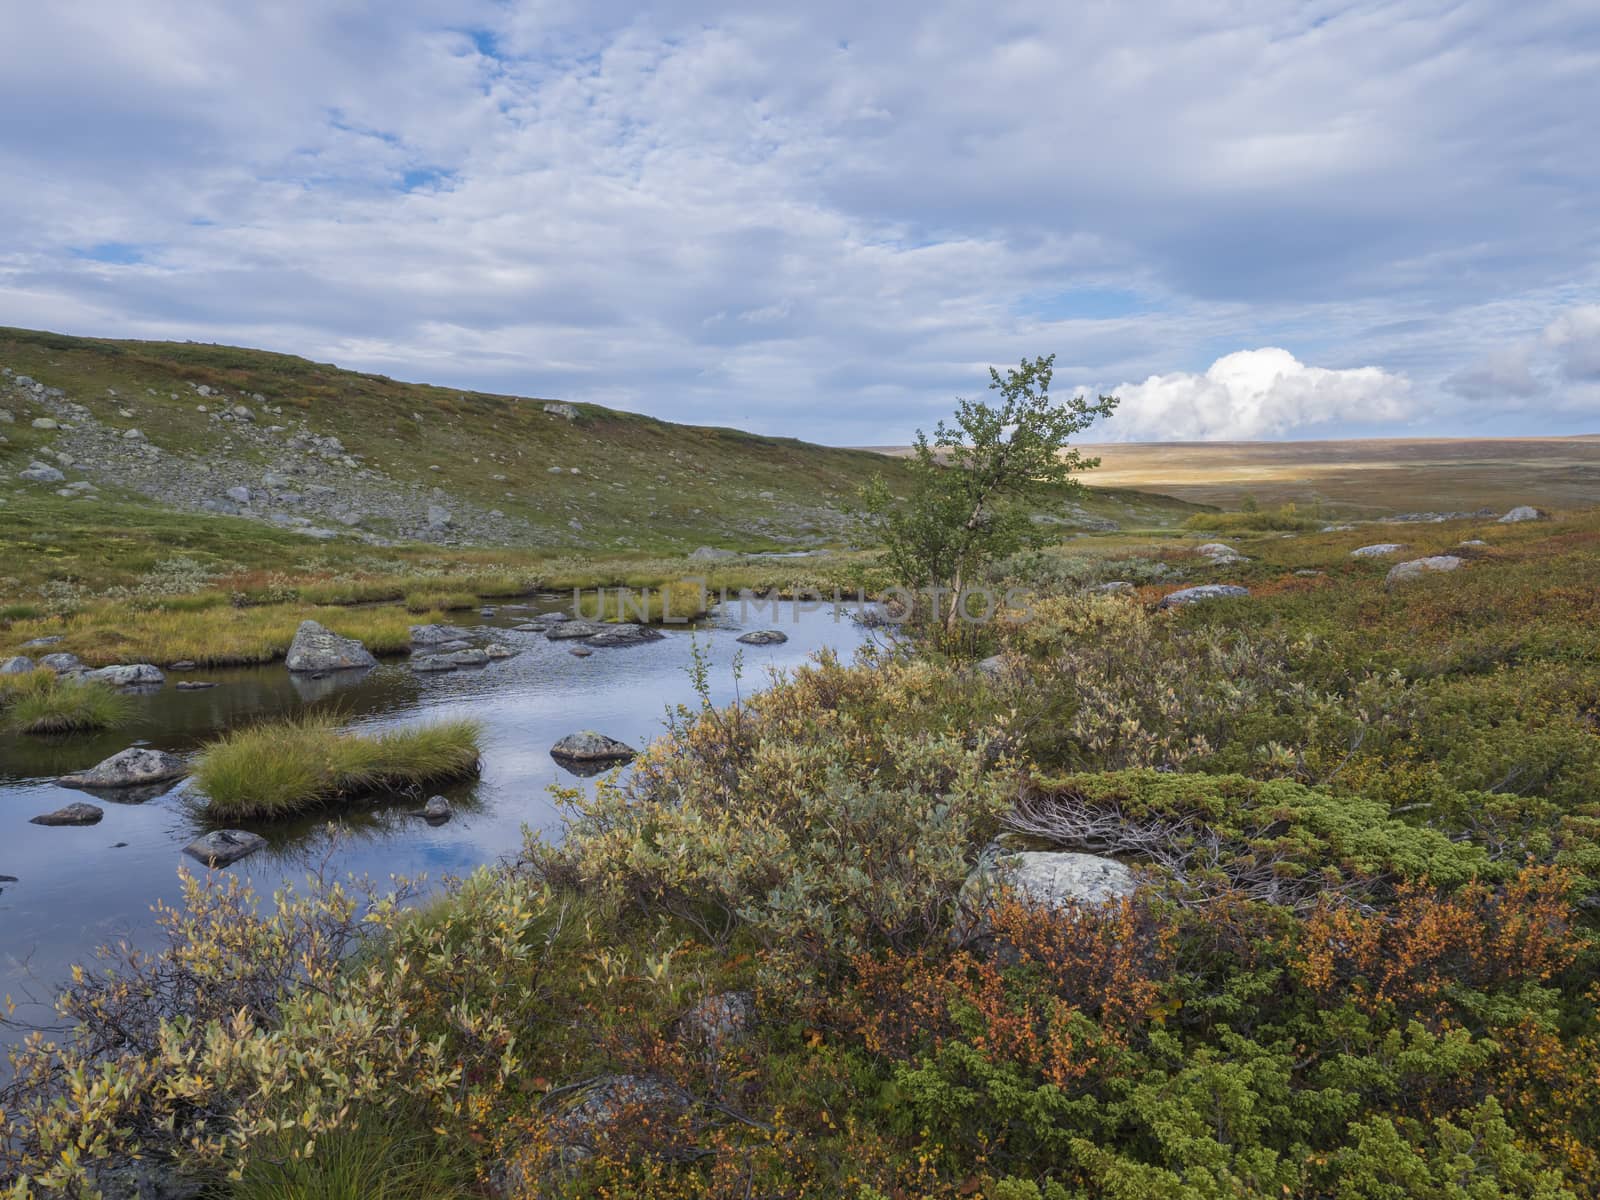 Lapland landscape with small pond, stones boulders, autumn colored bushes, birch tree,grass and mountains at Kungsleden hiking trail near Saltoluokta, Sweden. Blue sky white clouds. by Henkeova